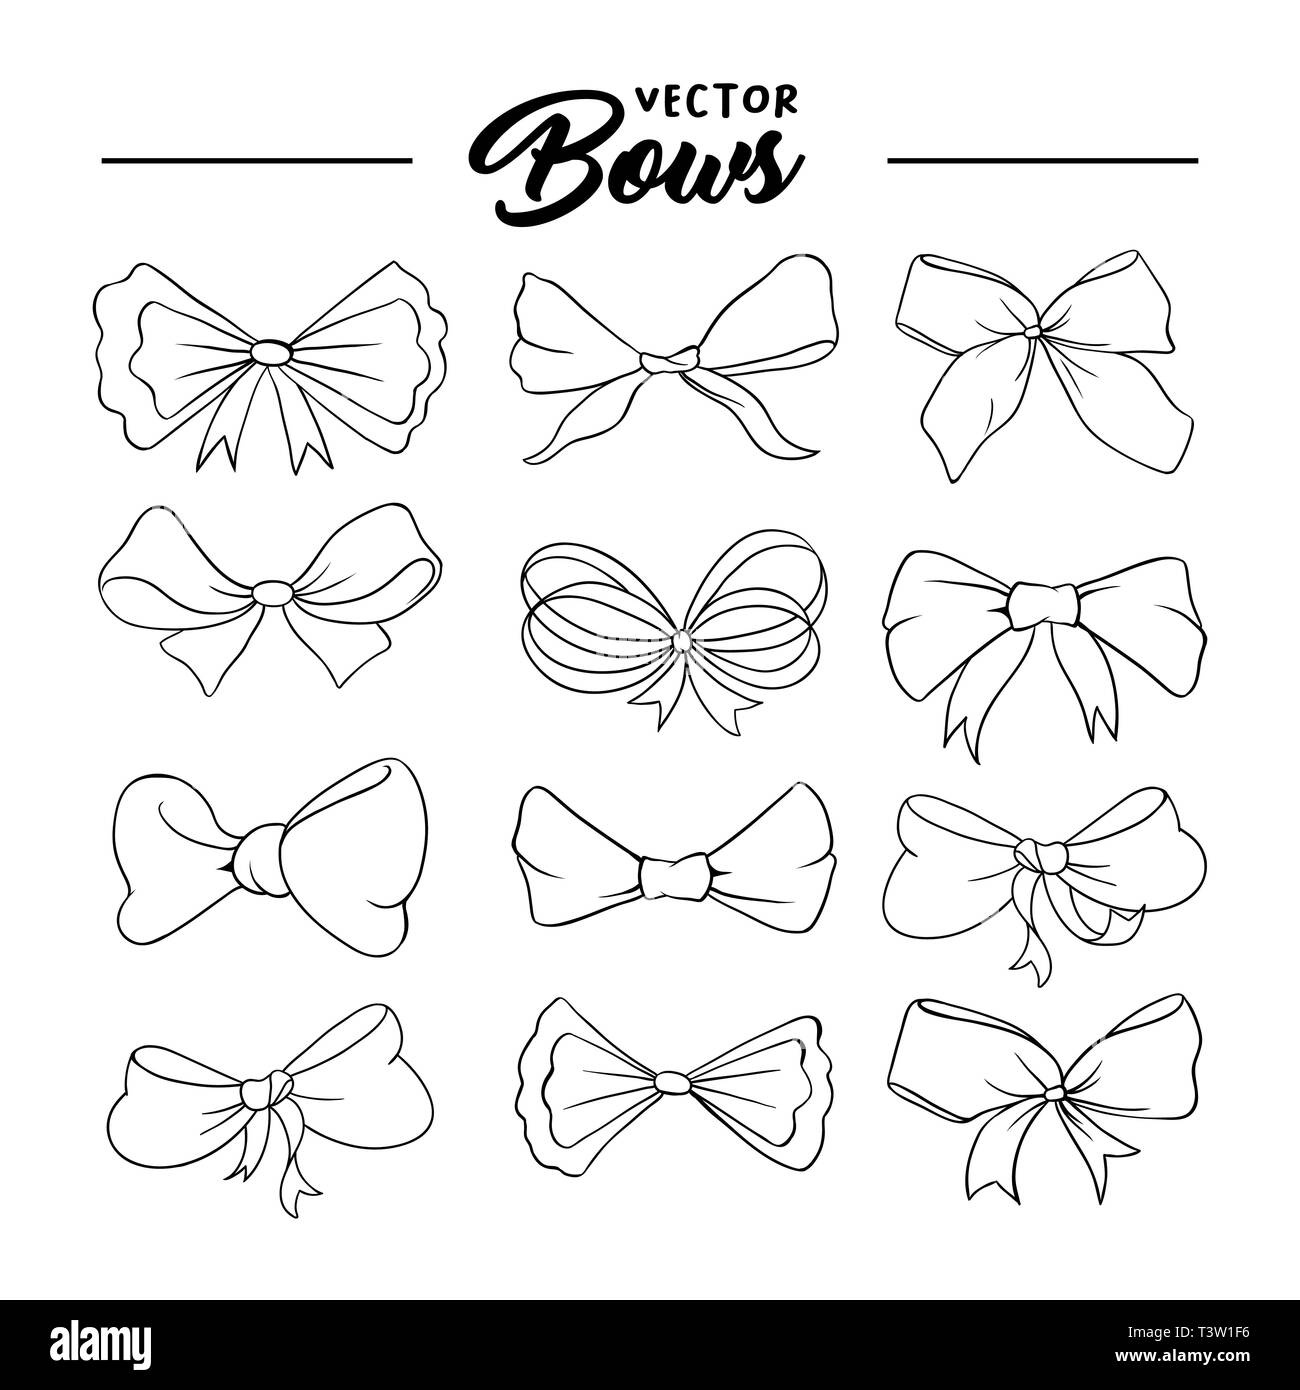 Bows handdrawn illustrations set. Ribbon knots linear drawings. Ink pen bowknots contour cliparts. Bow-tie sketches outline collection. Coloring book, greeting card thin line isolated design elements Stock Vector